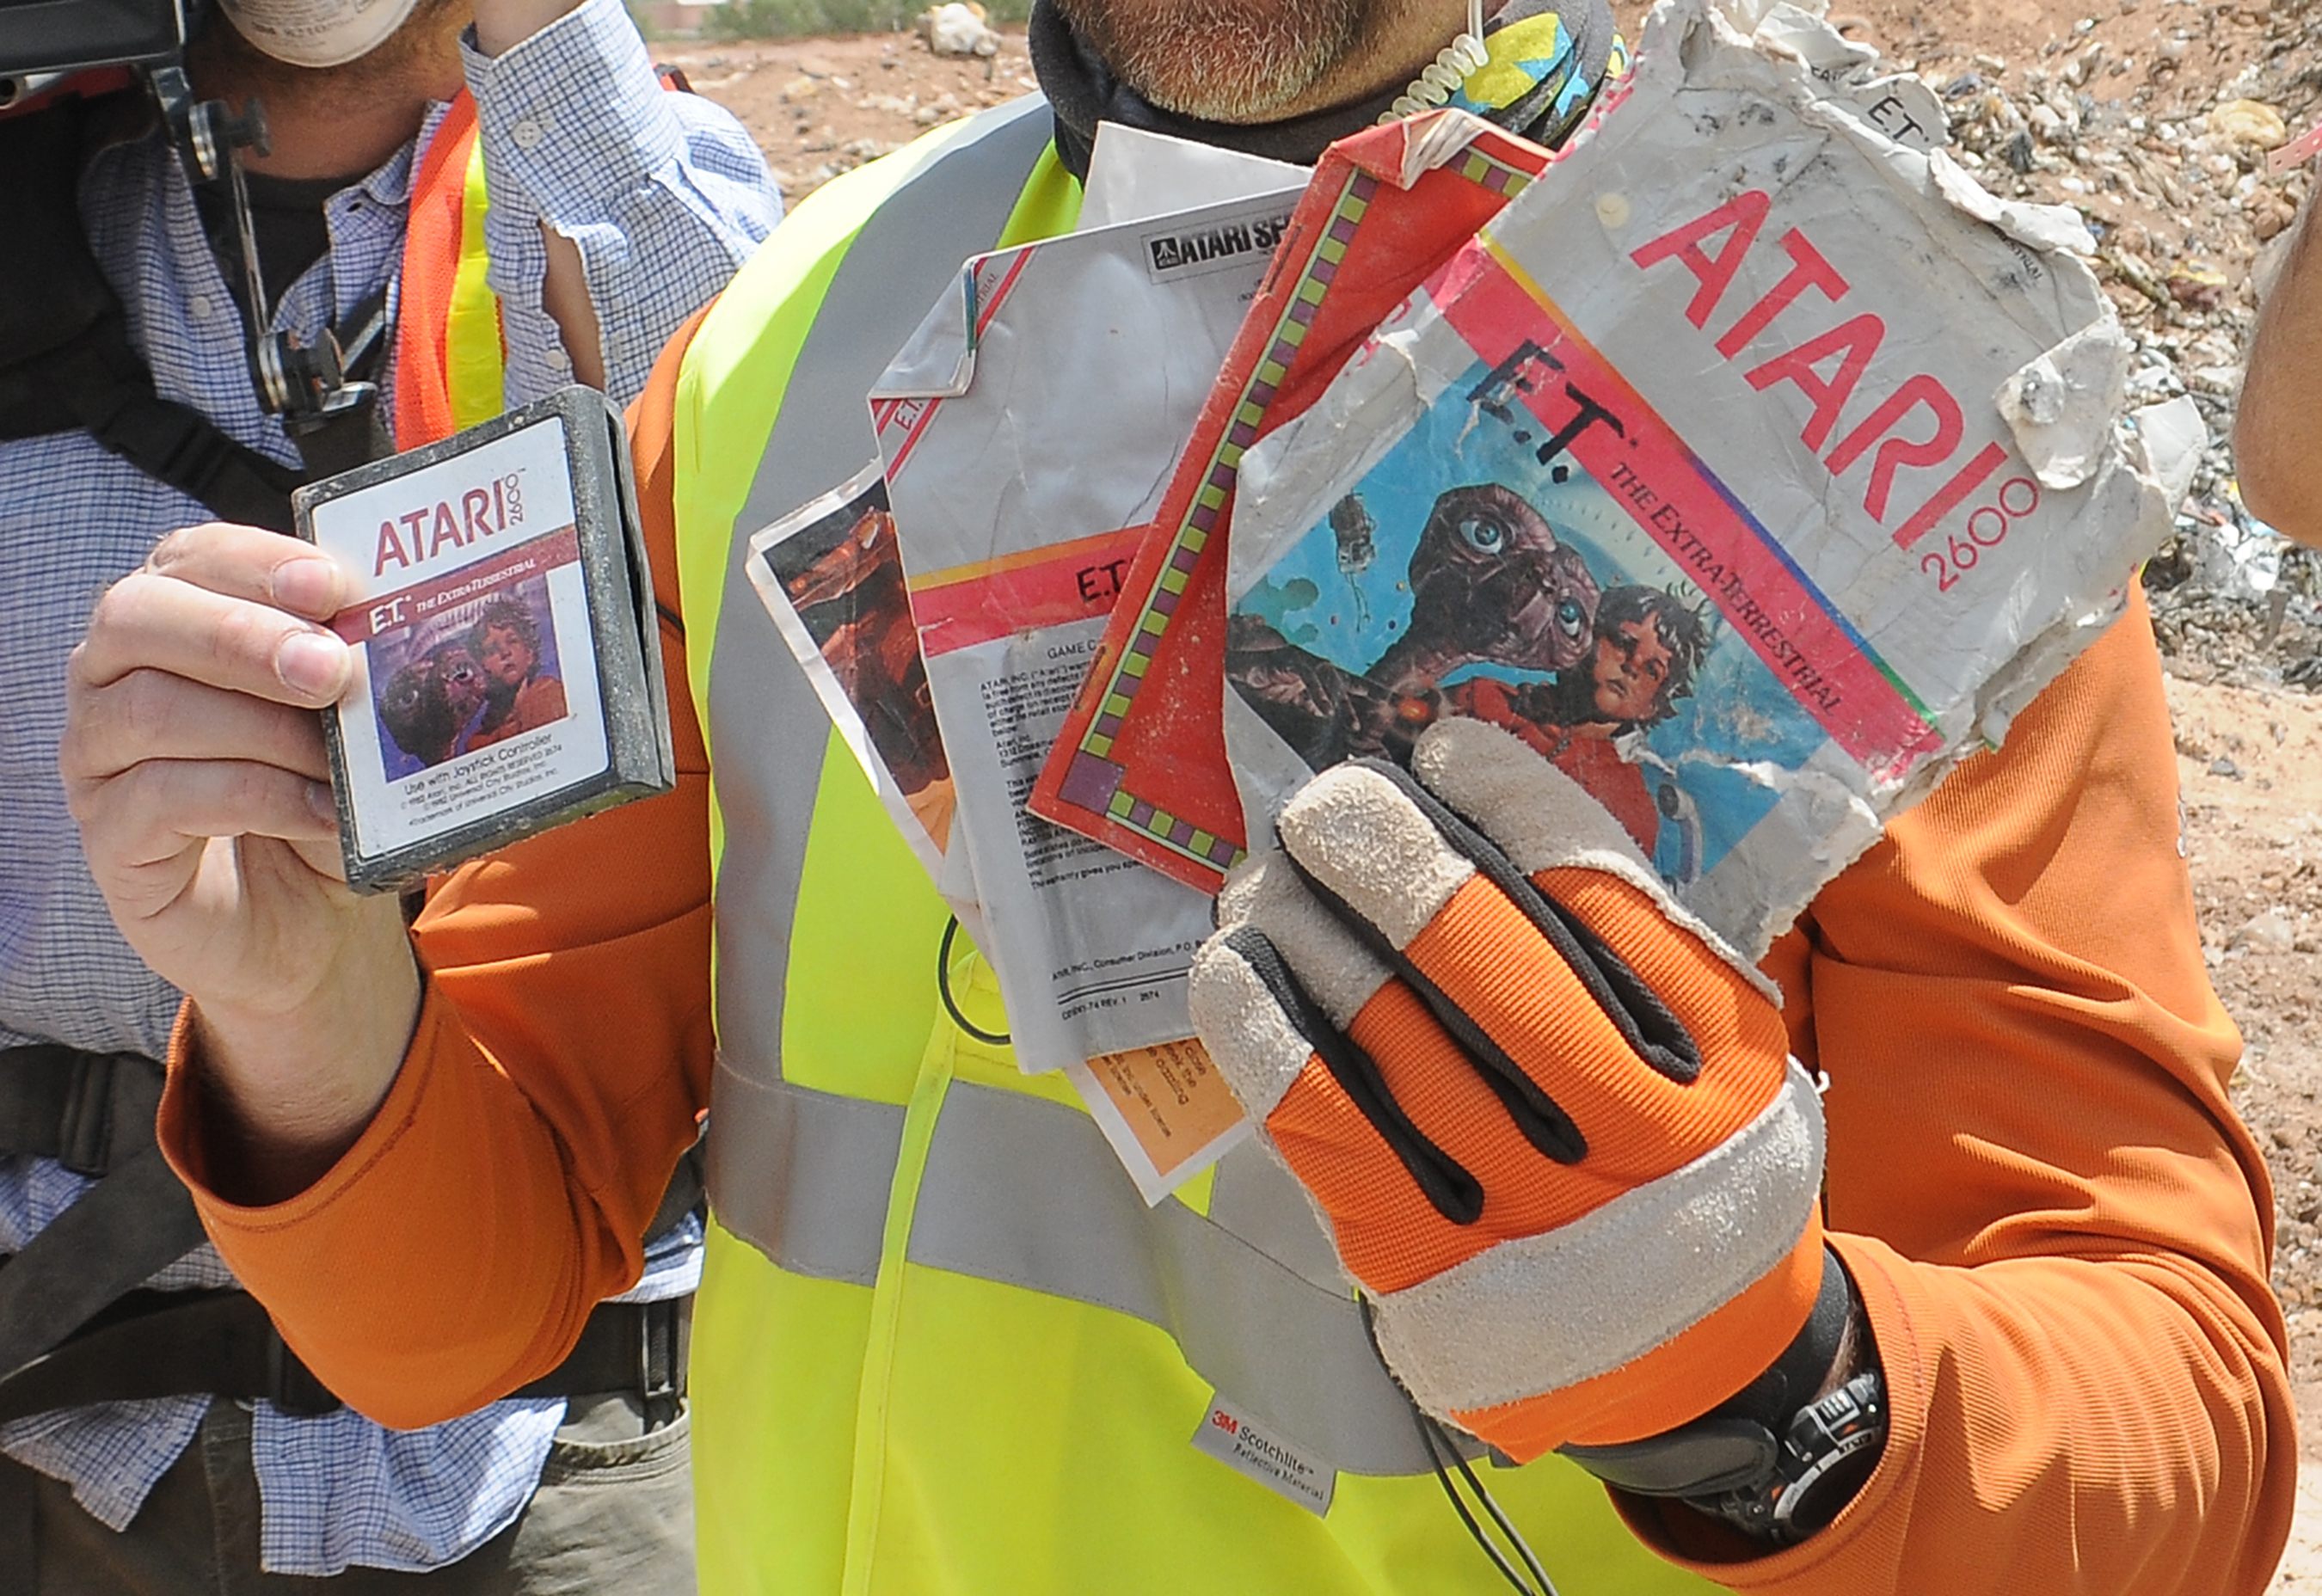 A worker shows the first recovered 'E.T. the Extra-Terrestrial' cartridge at the old Alamogordo landfill in New Mexico on Saturday. | REUTERS